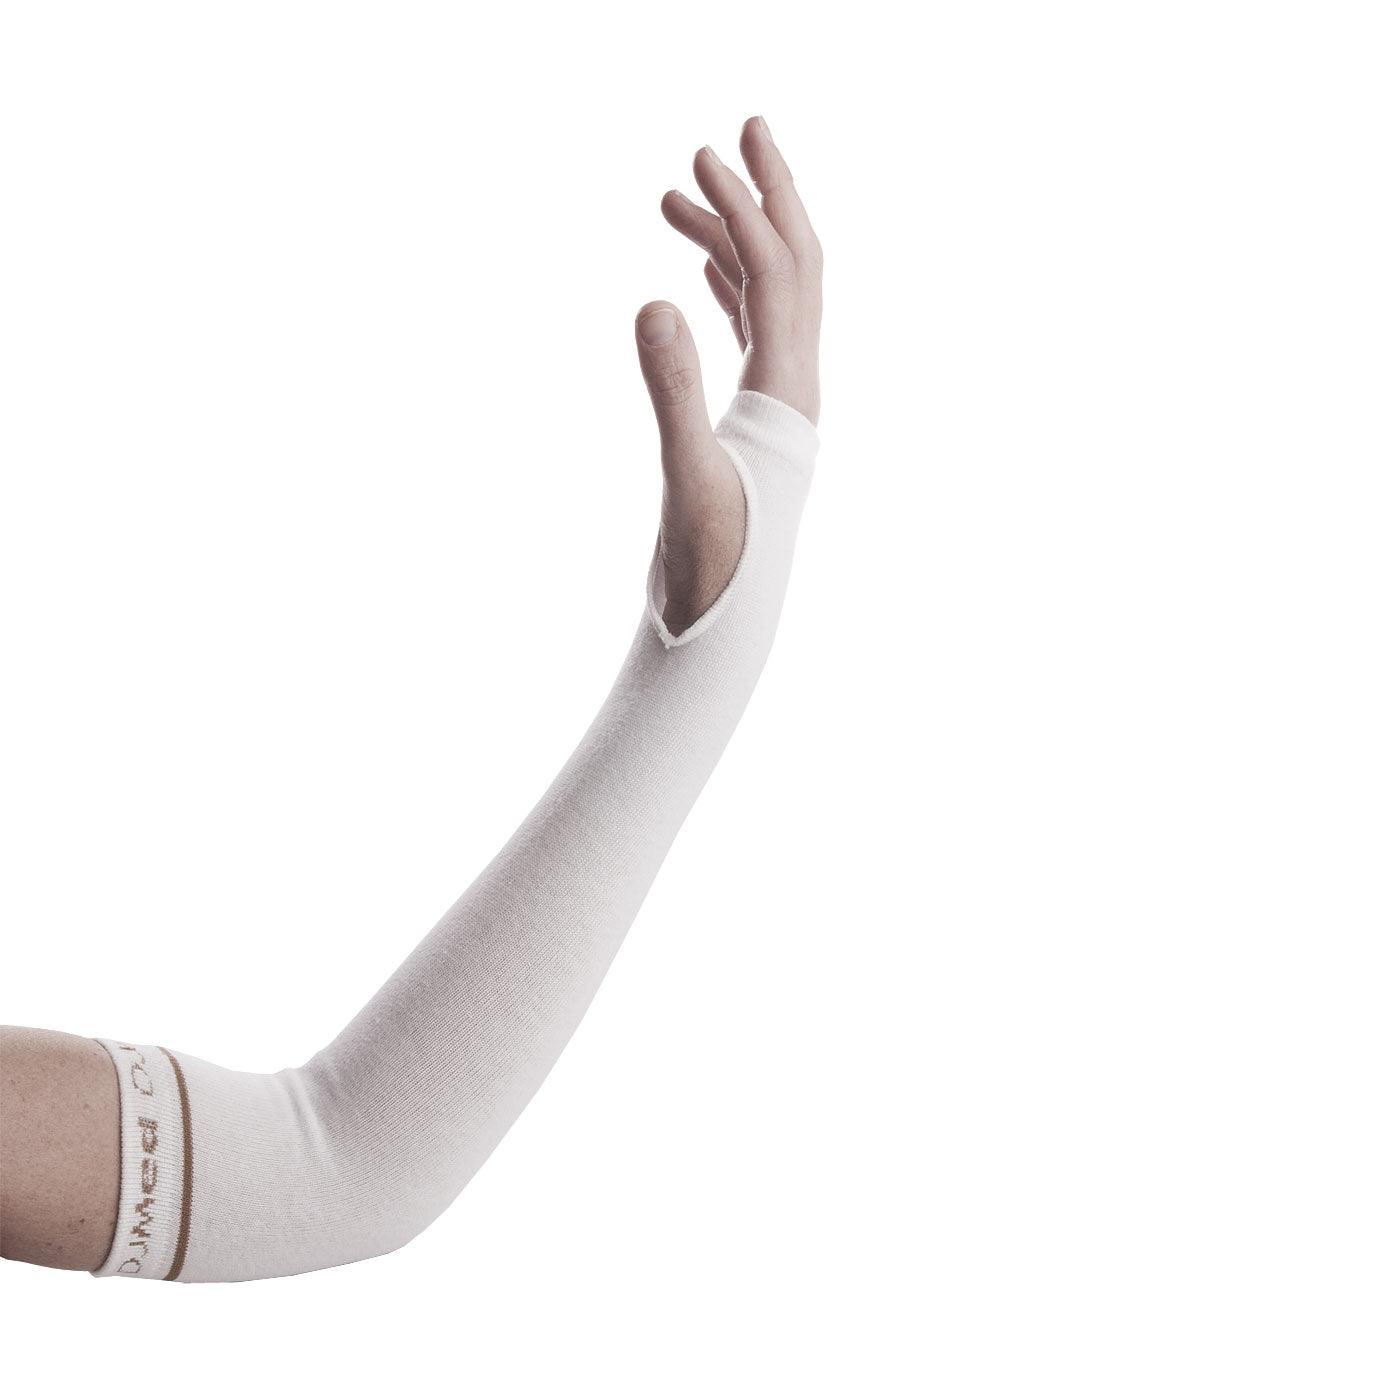 Skin Protectors For Arms - White - Small